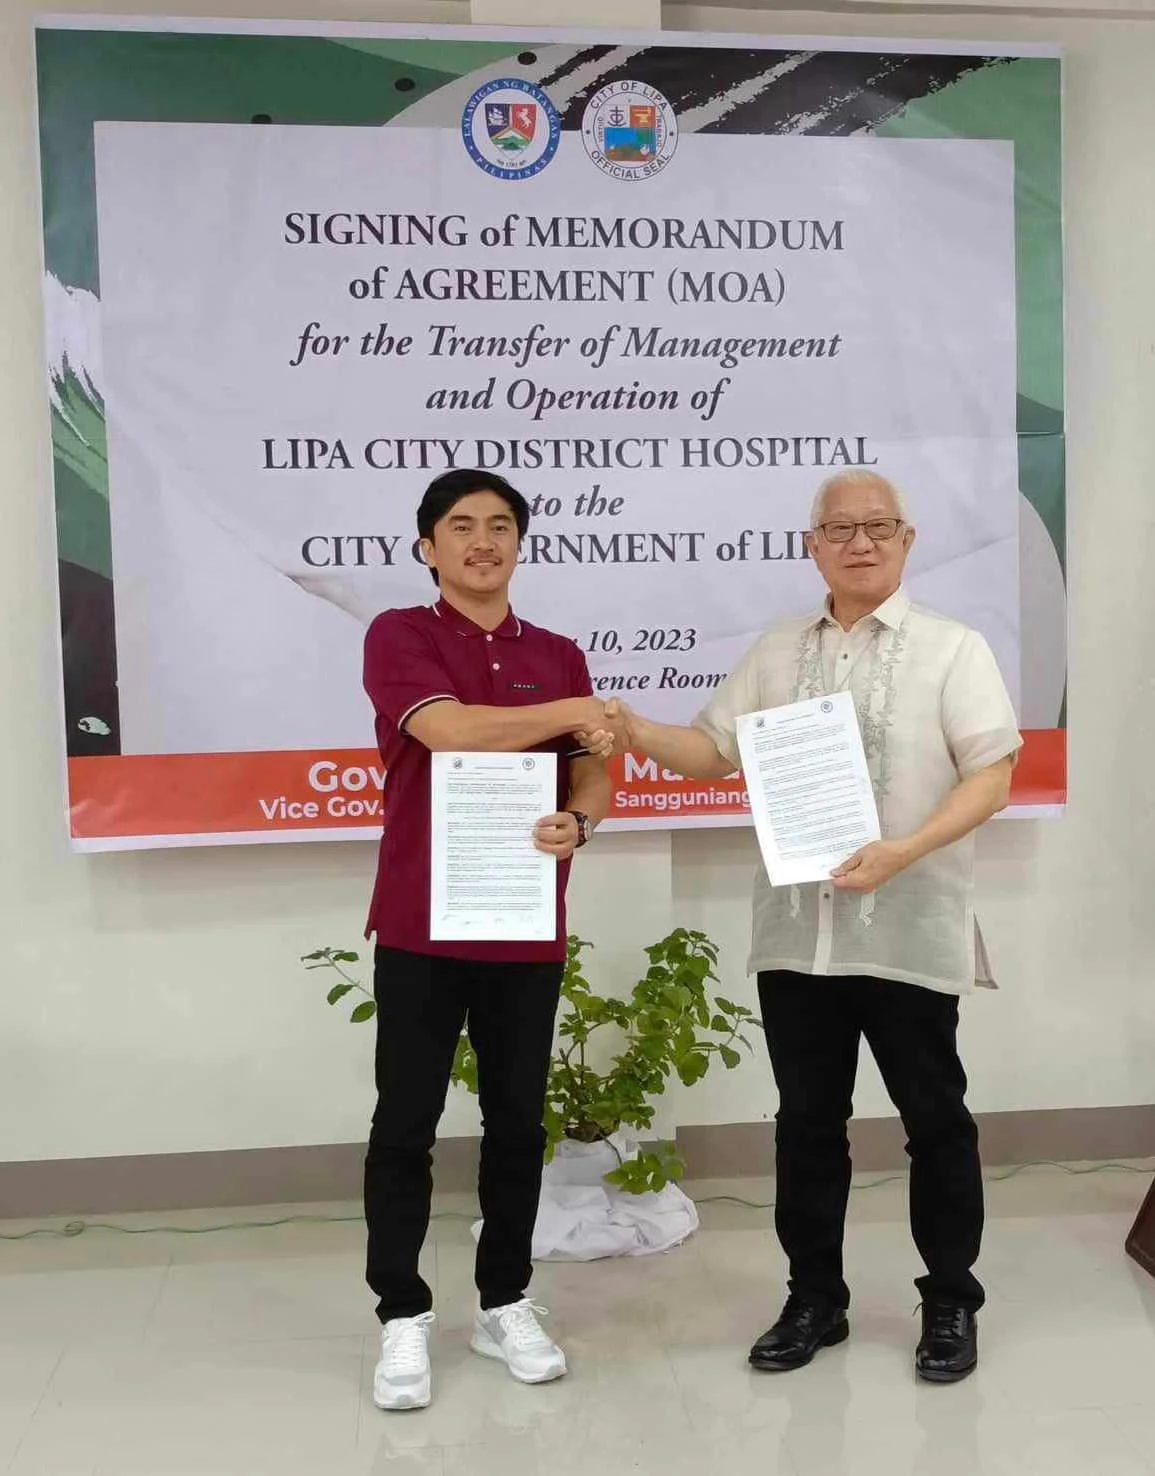 Lipa City District Hospital is now under Lipa government